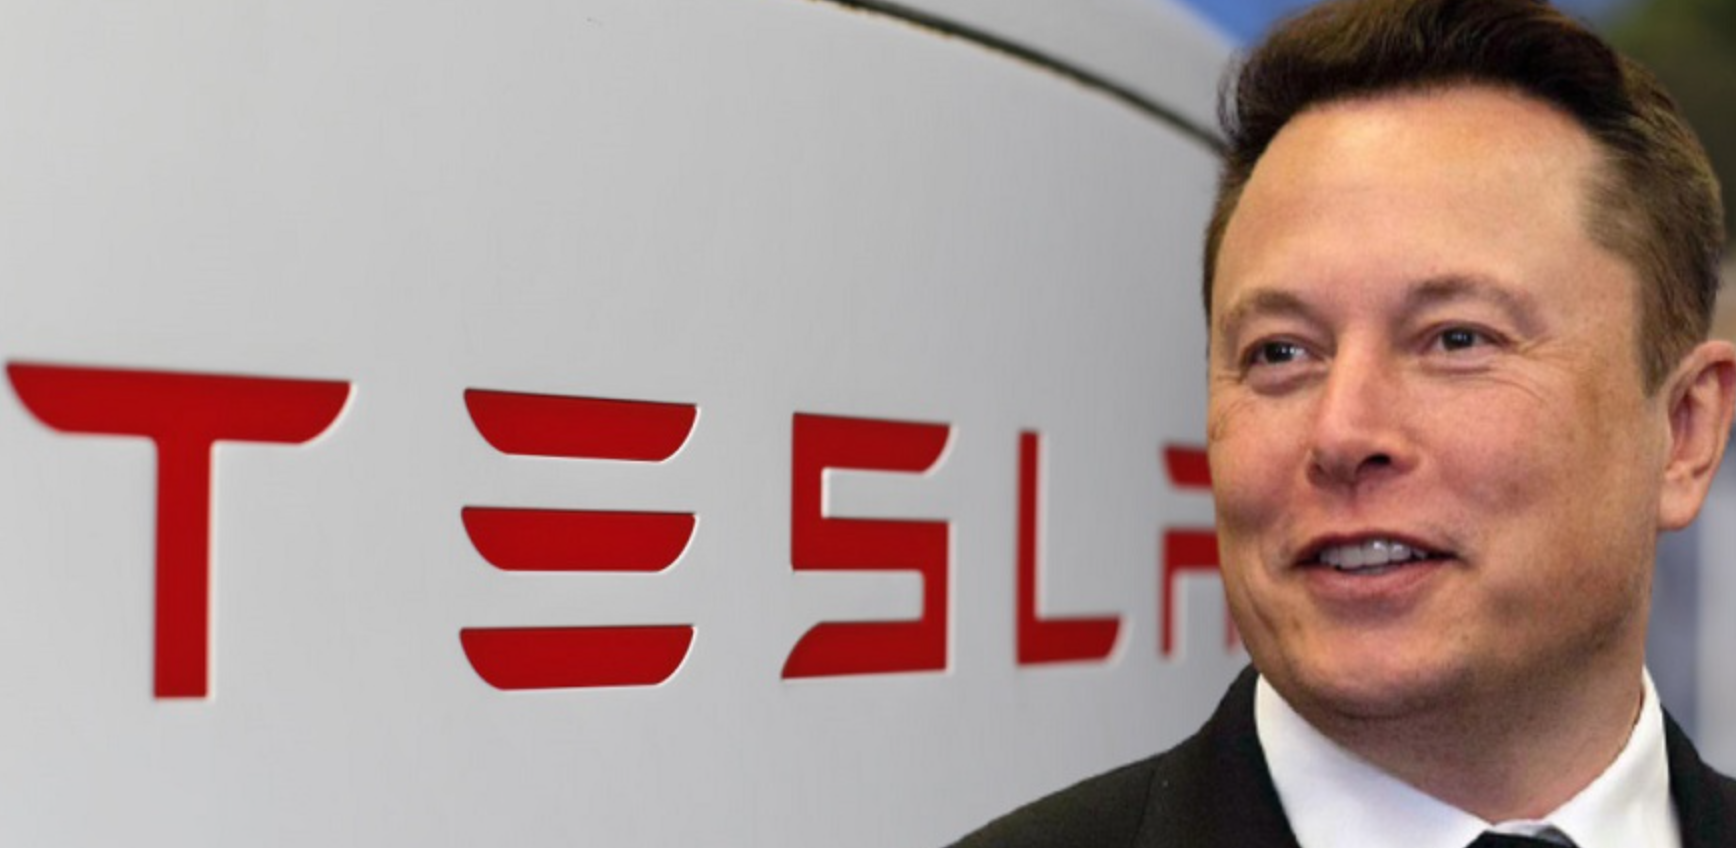 Why Tesla's Big Shake-Up Matters: Elon Musk Plans Major Changes Amid Growing Global Rivalry